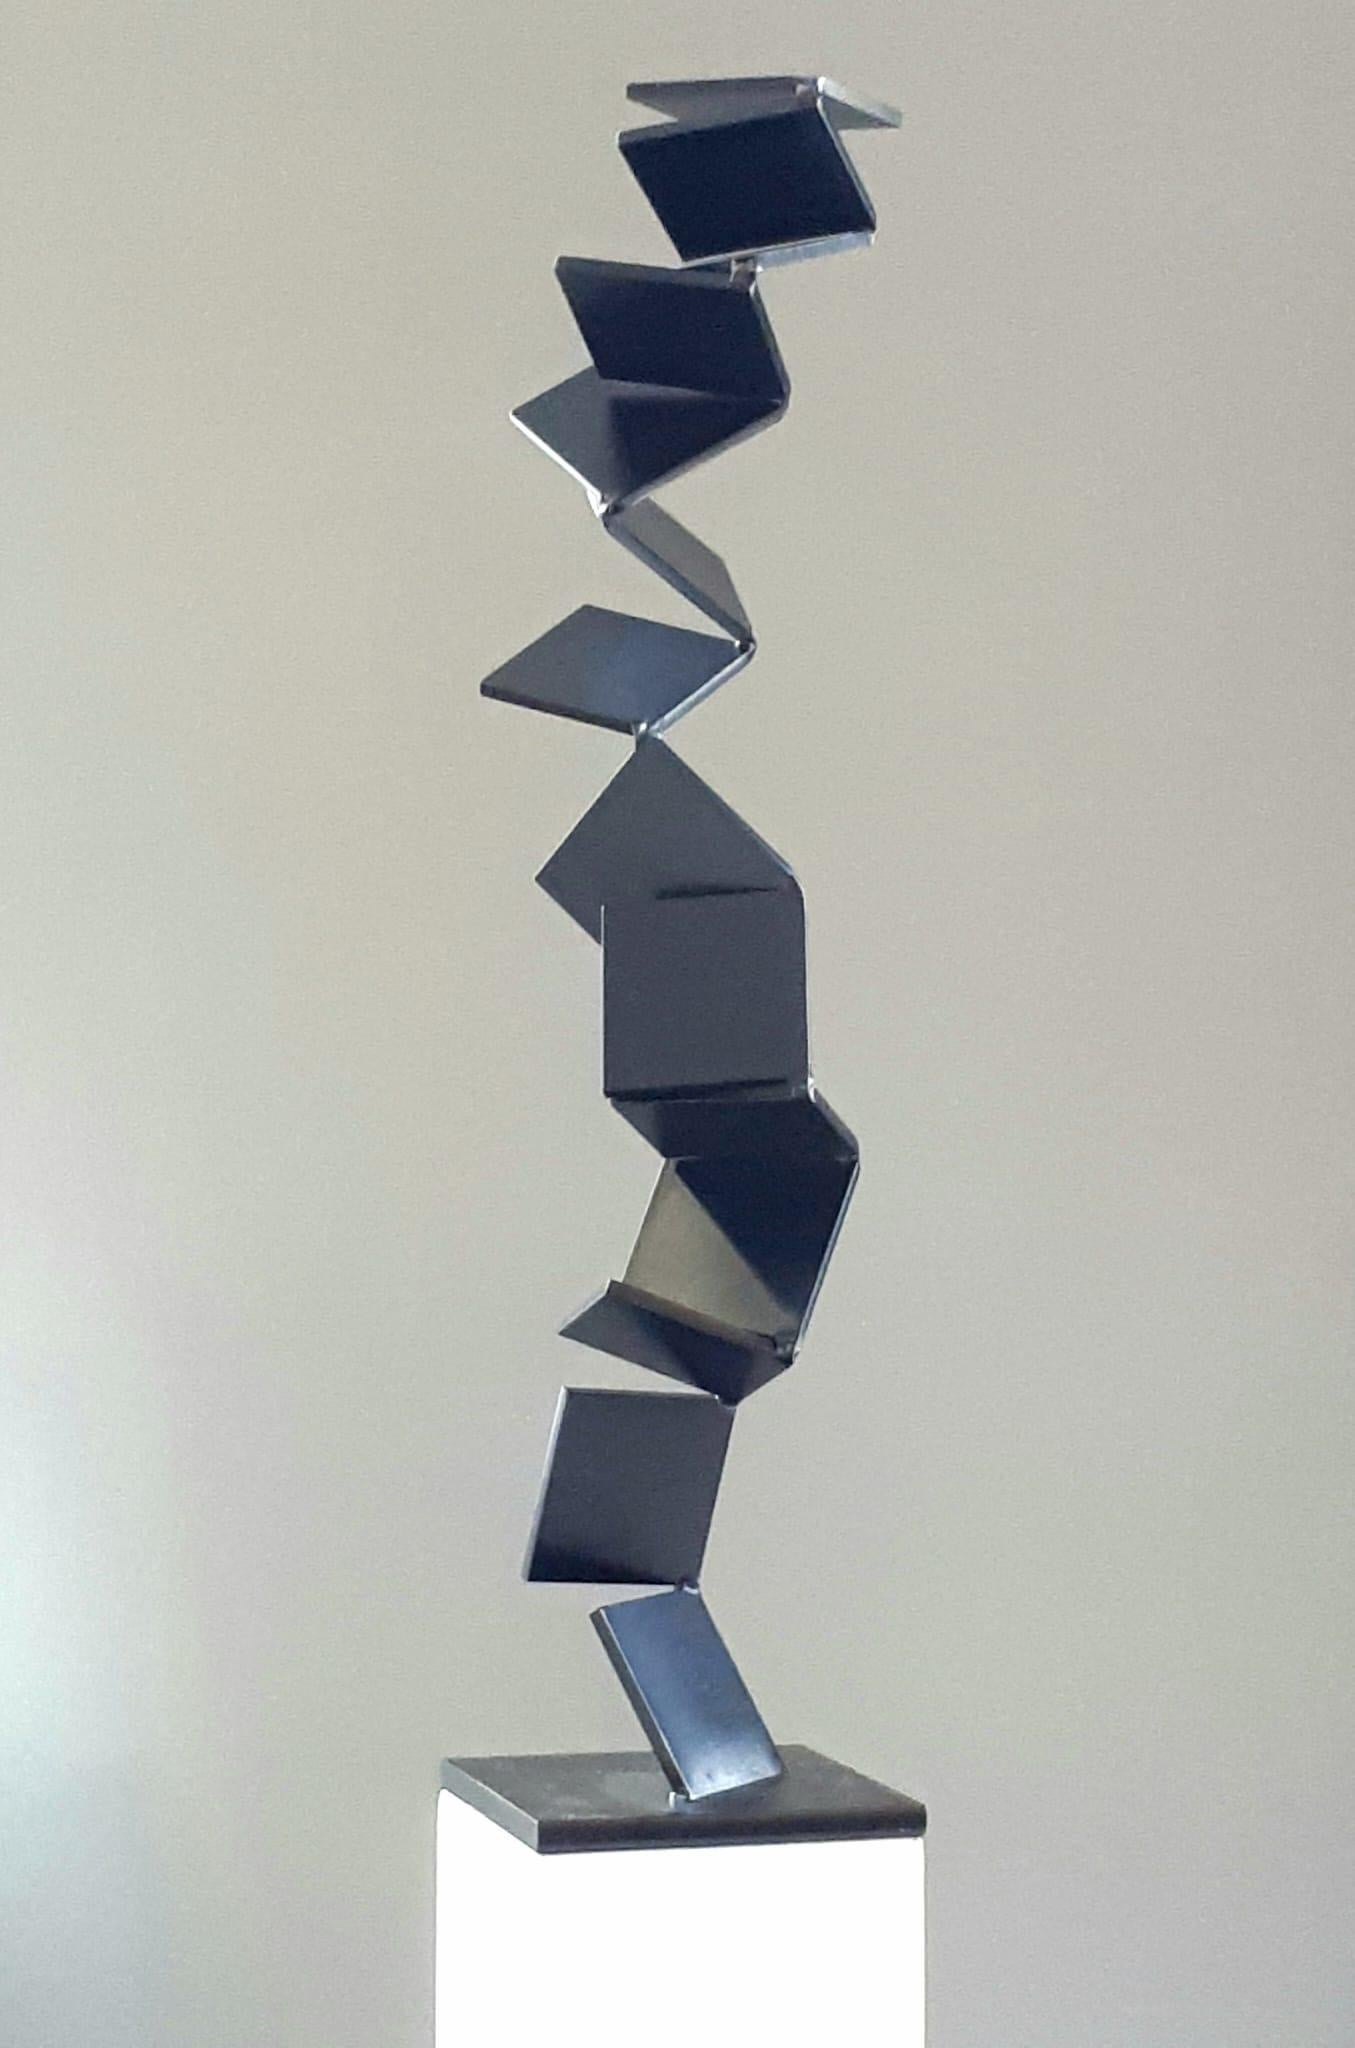 Artist: Kuno Vollet

Title: Aspiring Path

Contemporary steel sculpture for inside or garden outdoor spaces.

Stunning large artwork. Possible to put on a pedestal or directly on to the ground.

Born in 1951 in Petersaurach, located in Upper